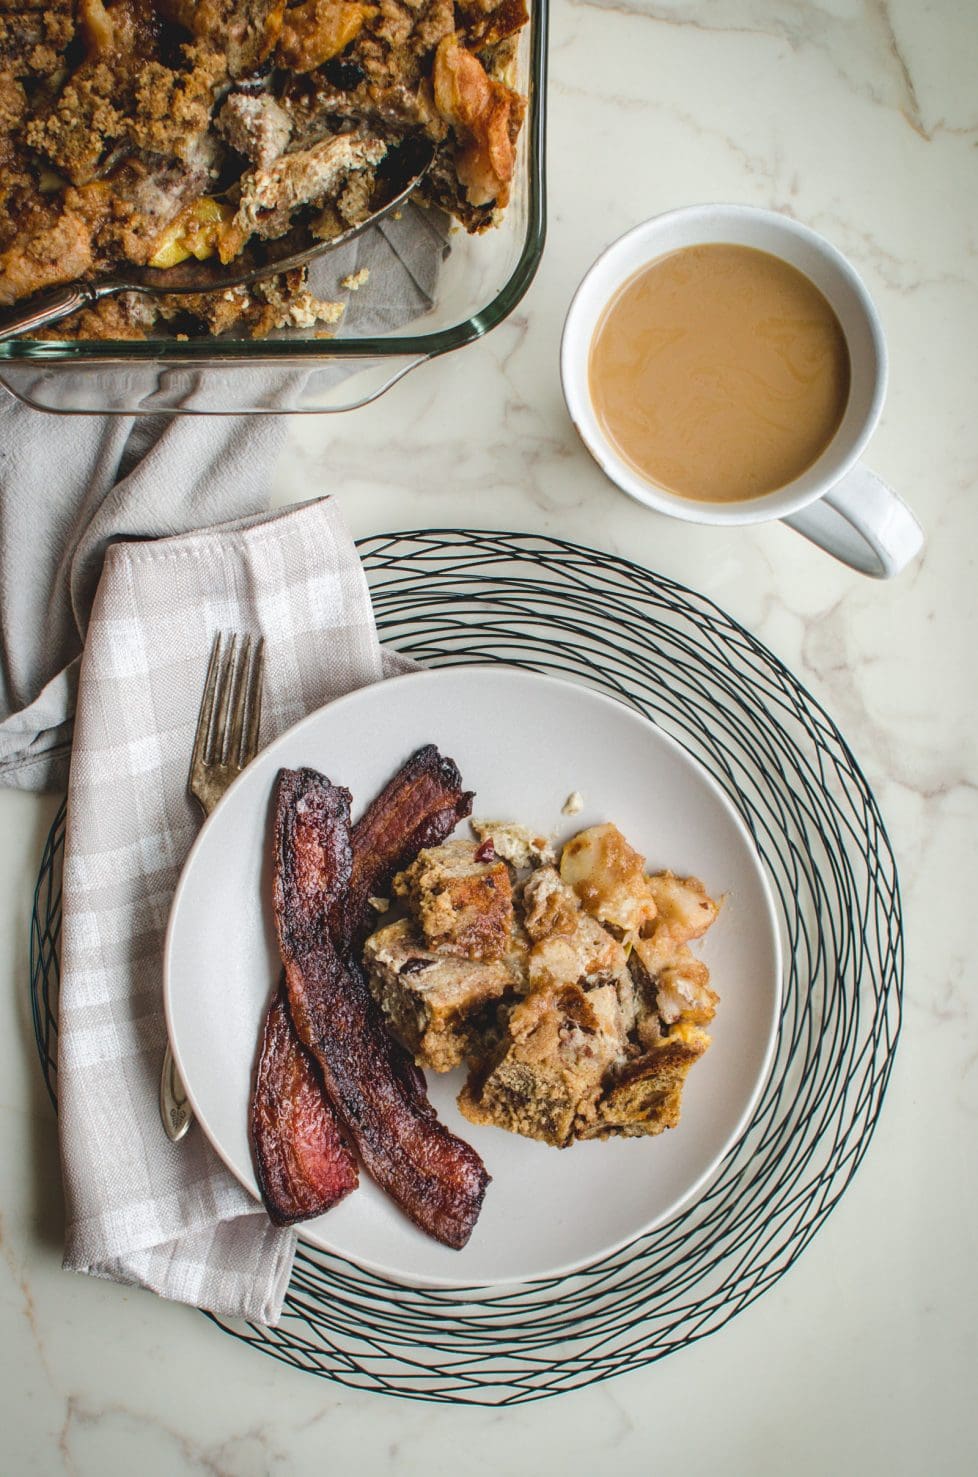 A plate with bacon and bread pudding next to a cup of coffee.